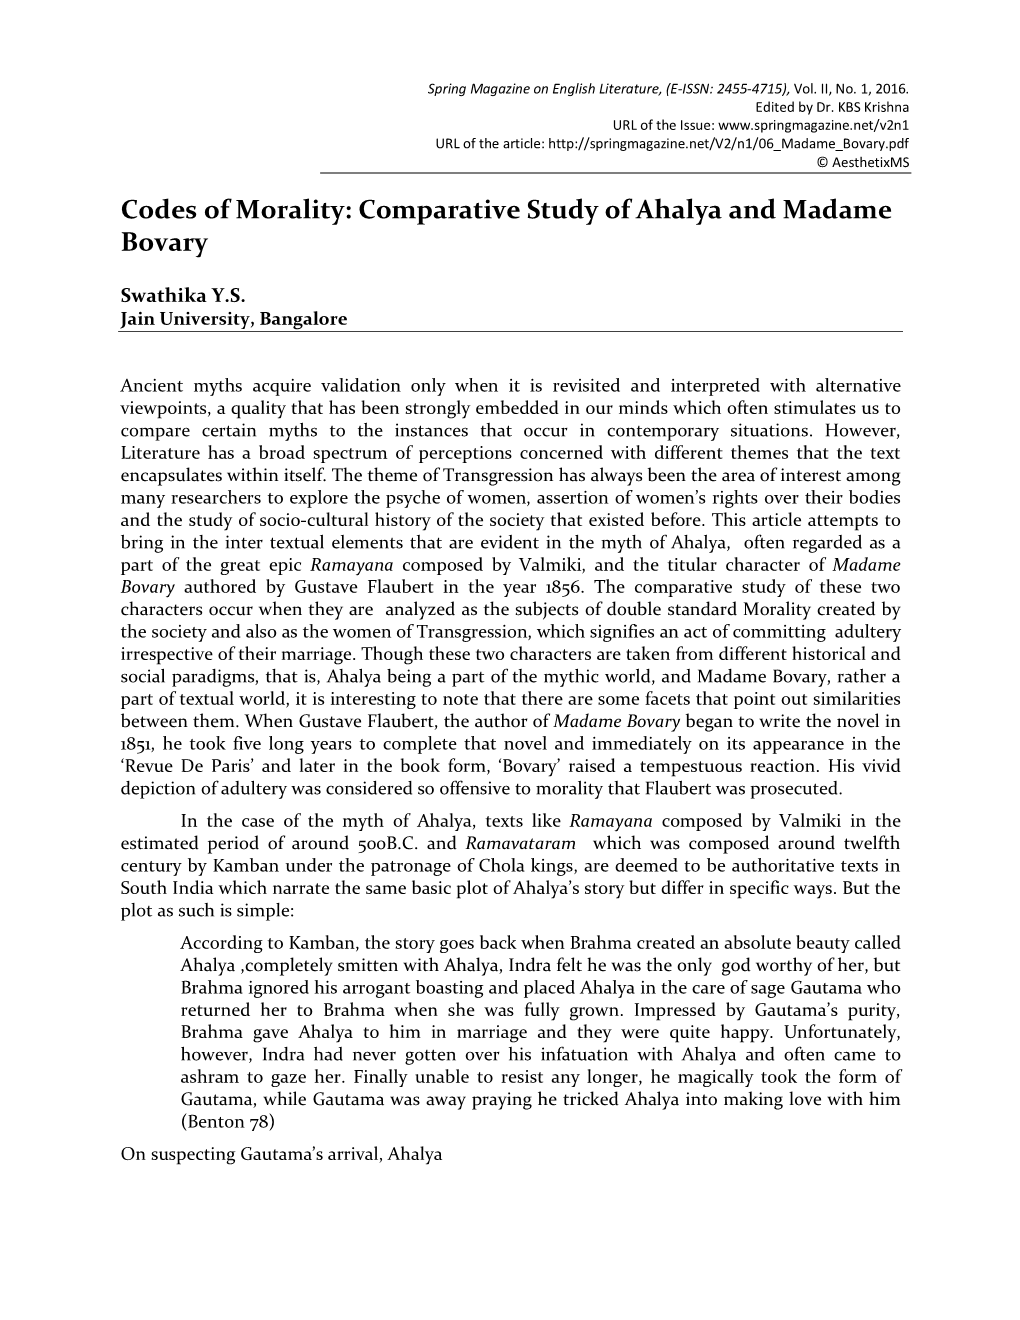 Codes of Morality: Comparative Study of Ahalya and Madame Bovary